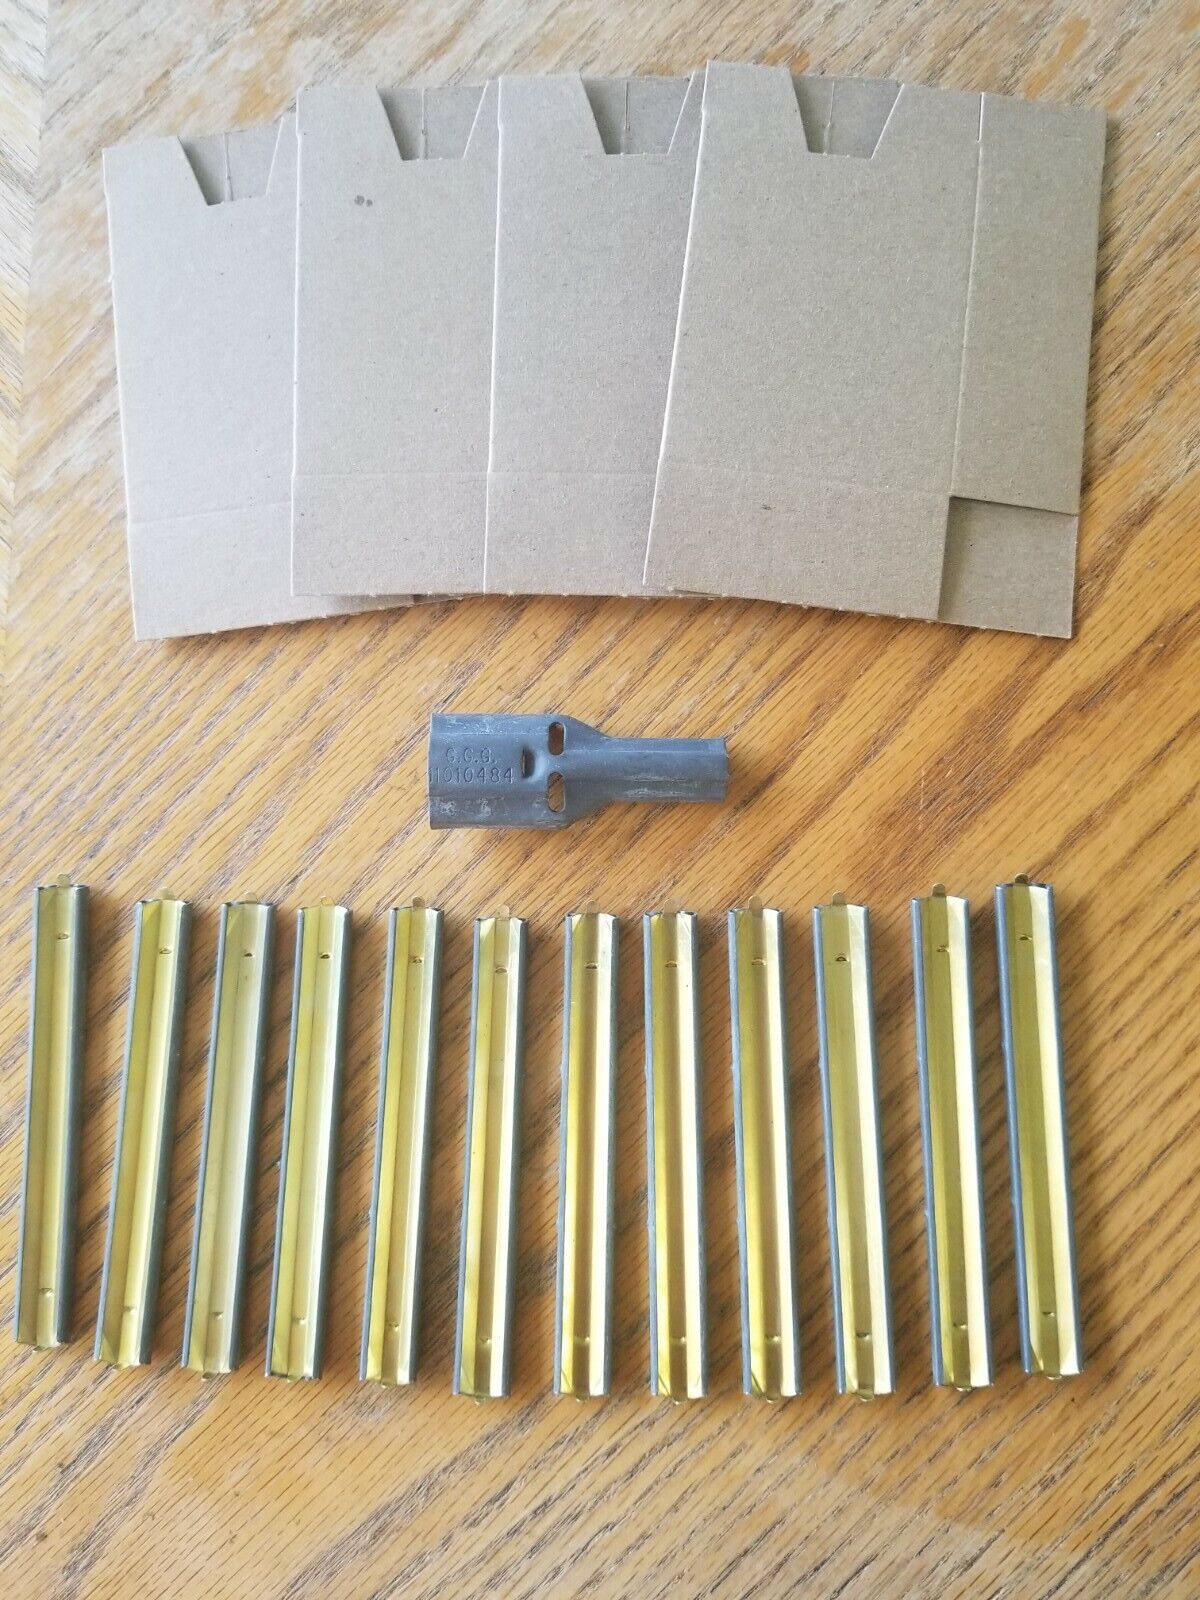 .223-5.56 STRIPPER CLIPS, LOADING GUIDE AND CARDBOARD BOXES NEW